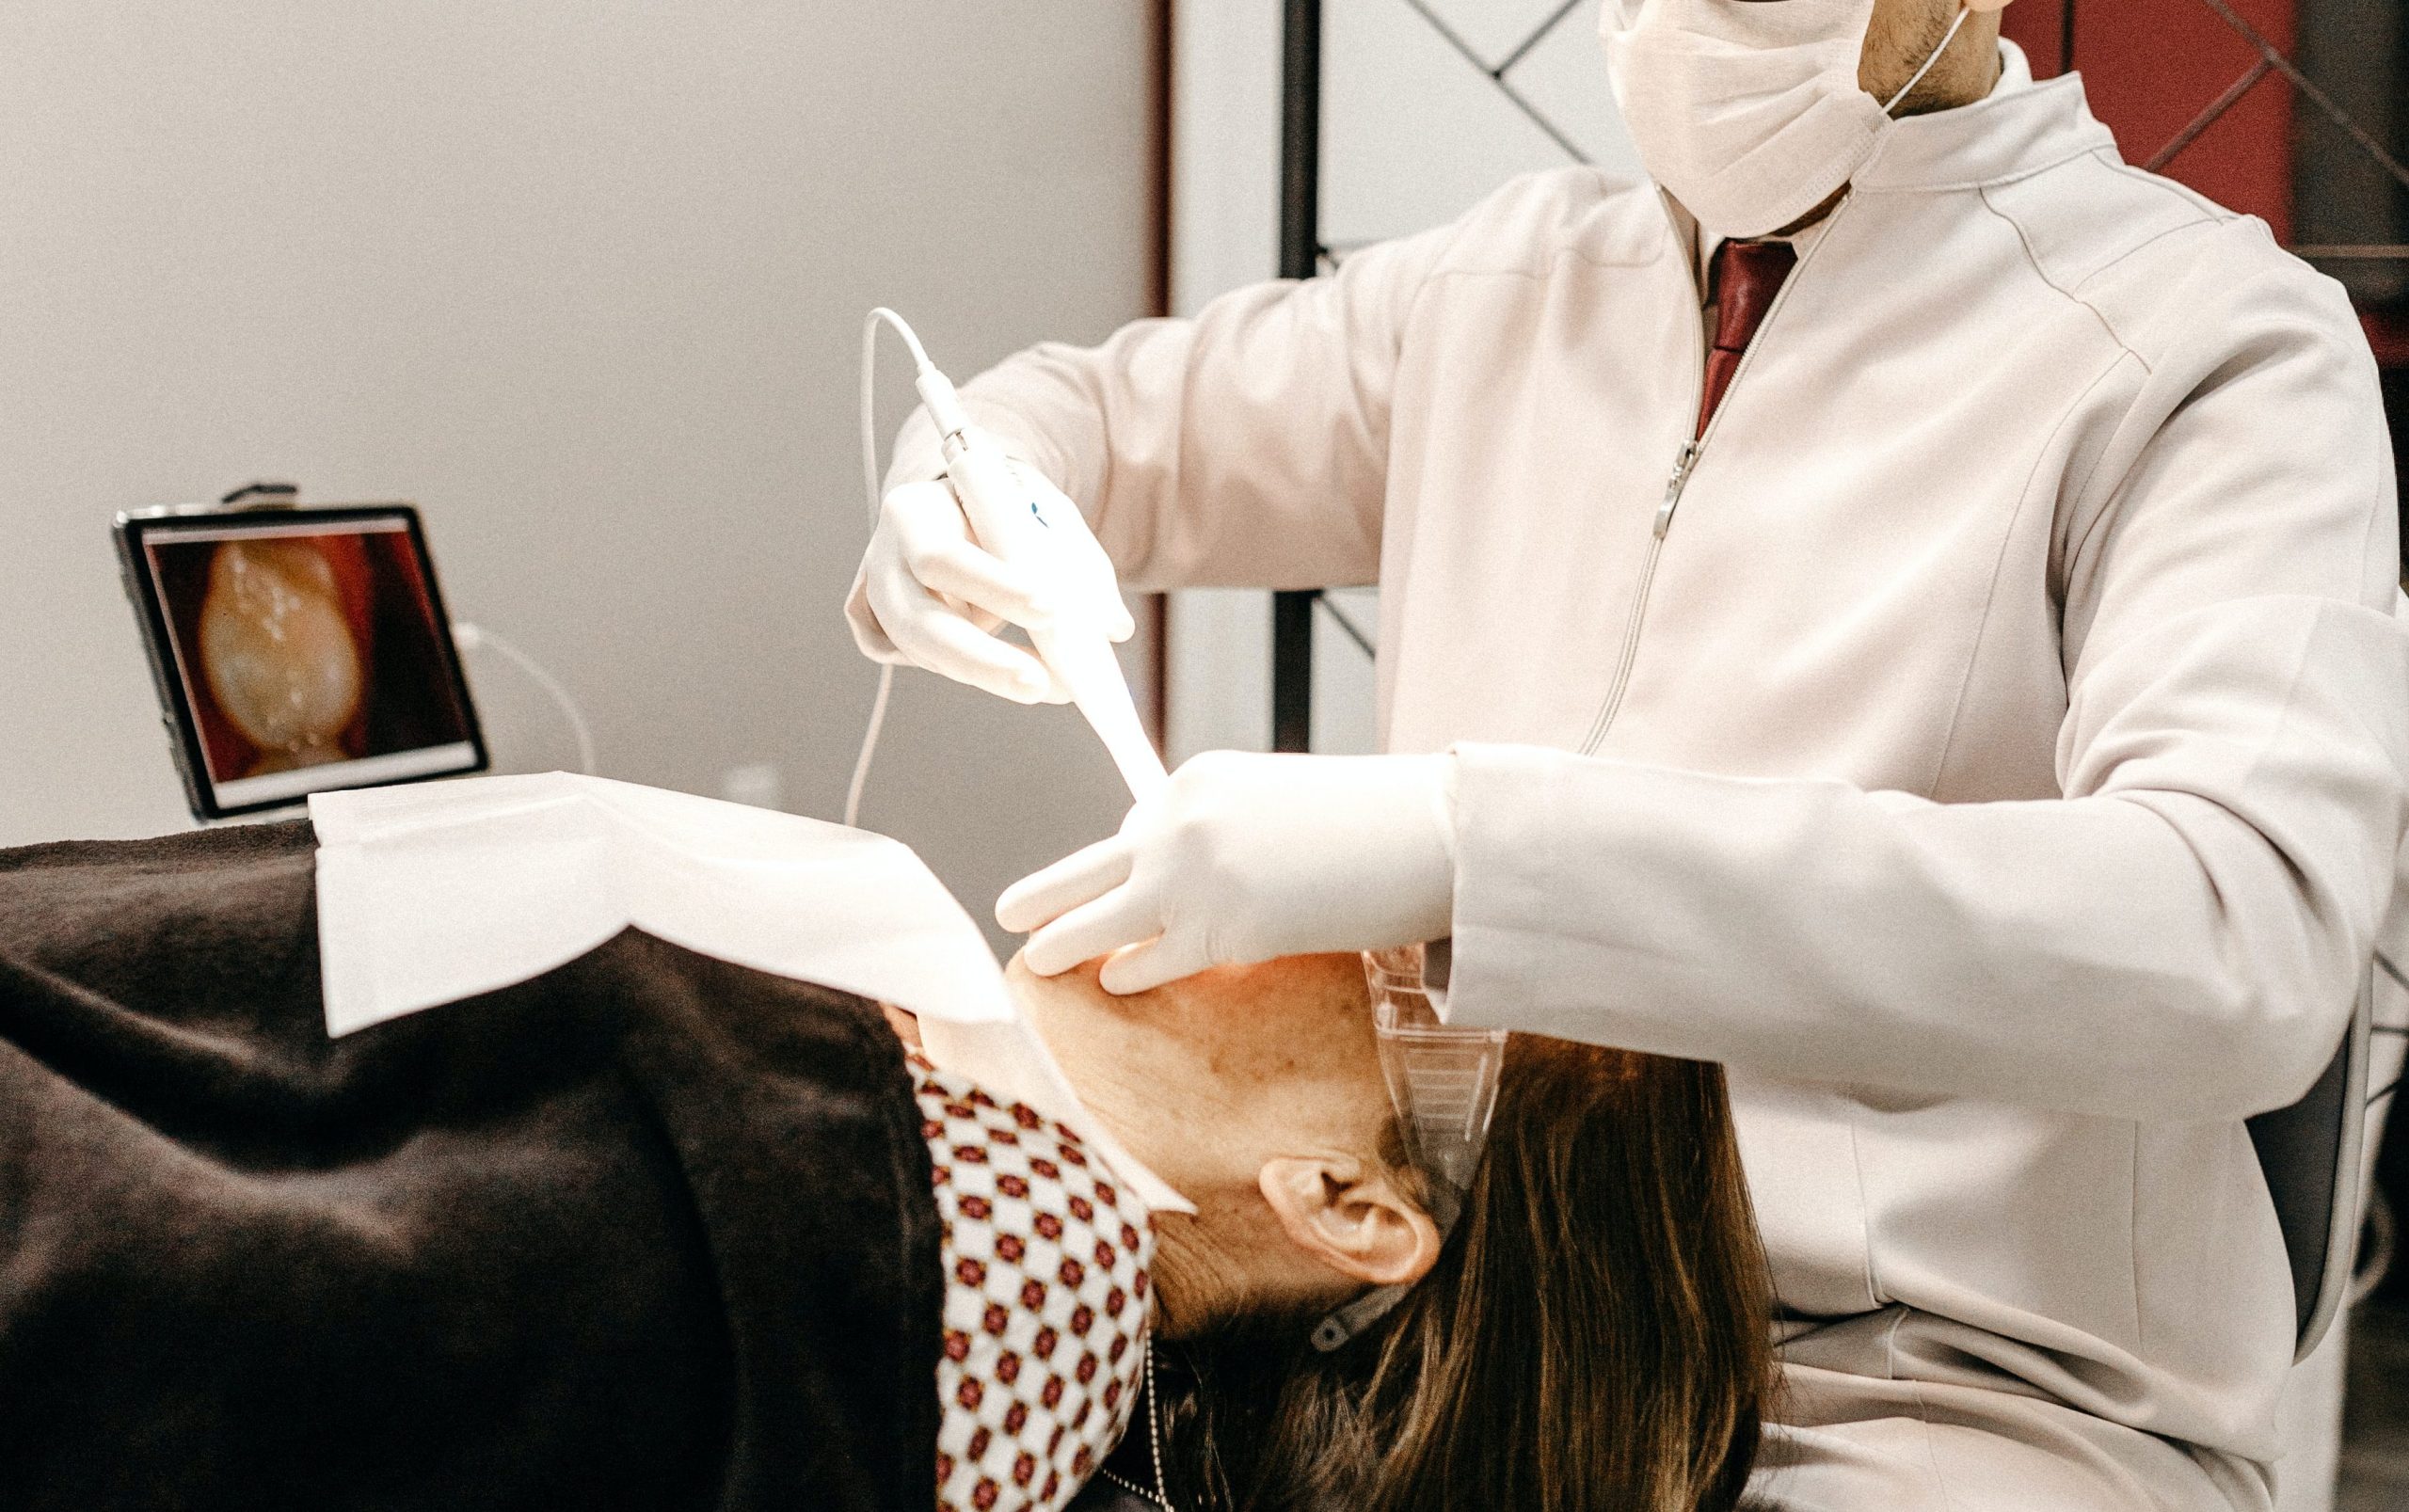 What Things To Consider Before Choosing The Dentist For Treatment?